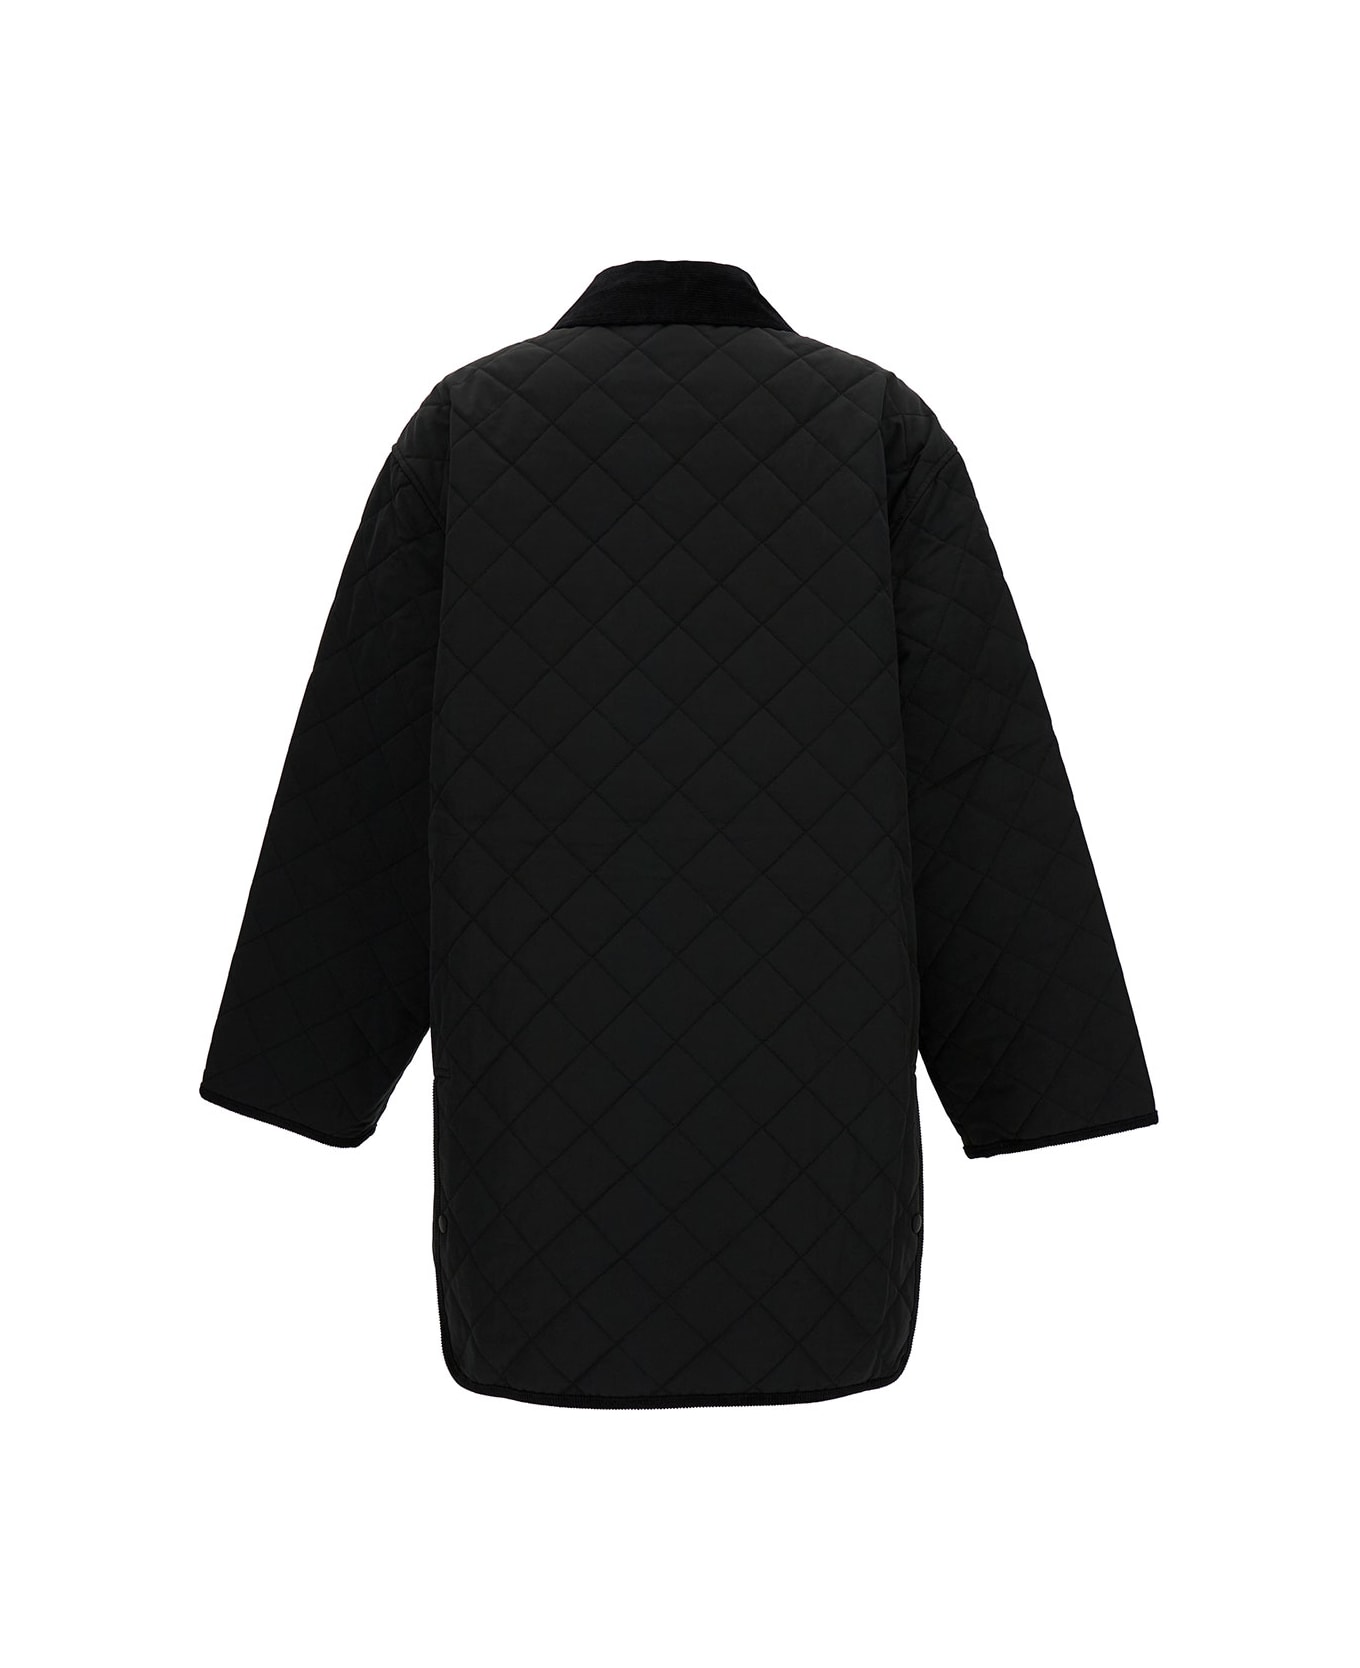 Totême Black Jacket With Collar And Oversized Pockets In Quilted Fabric Woman - Black コート